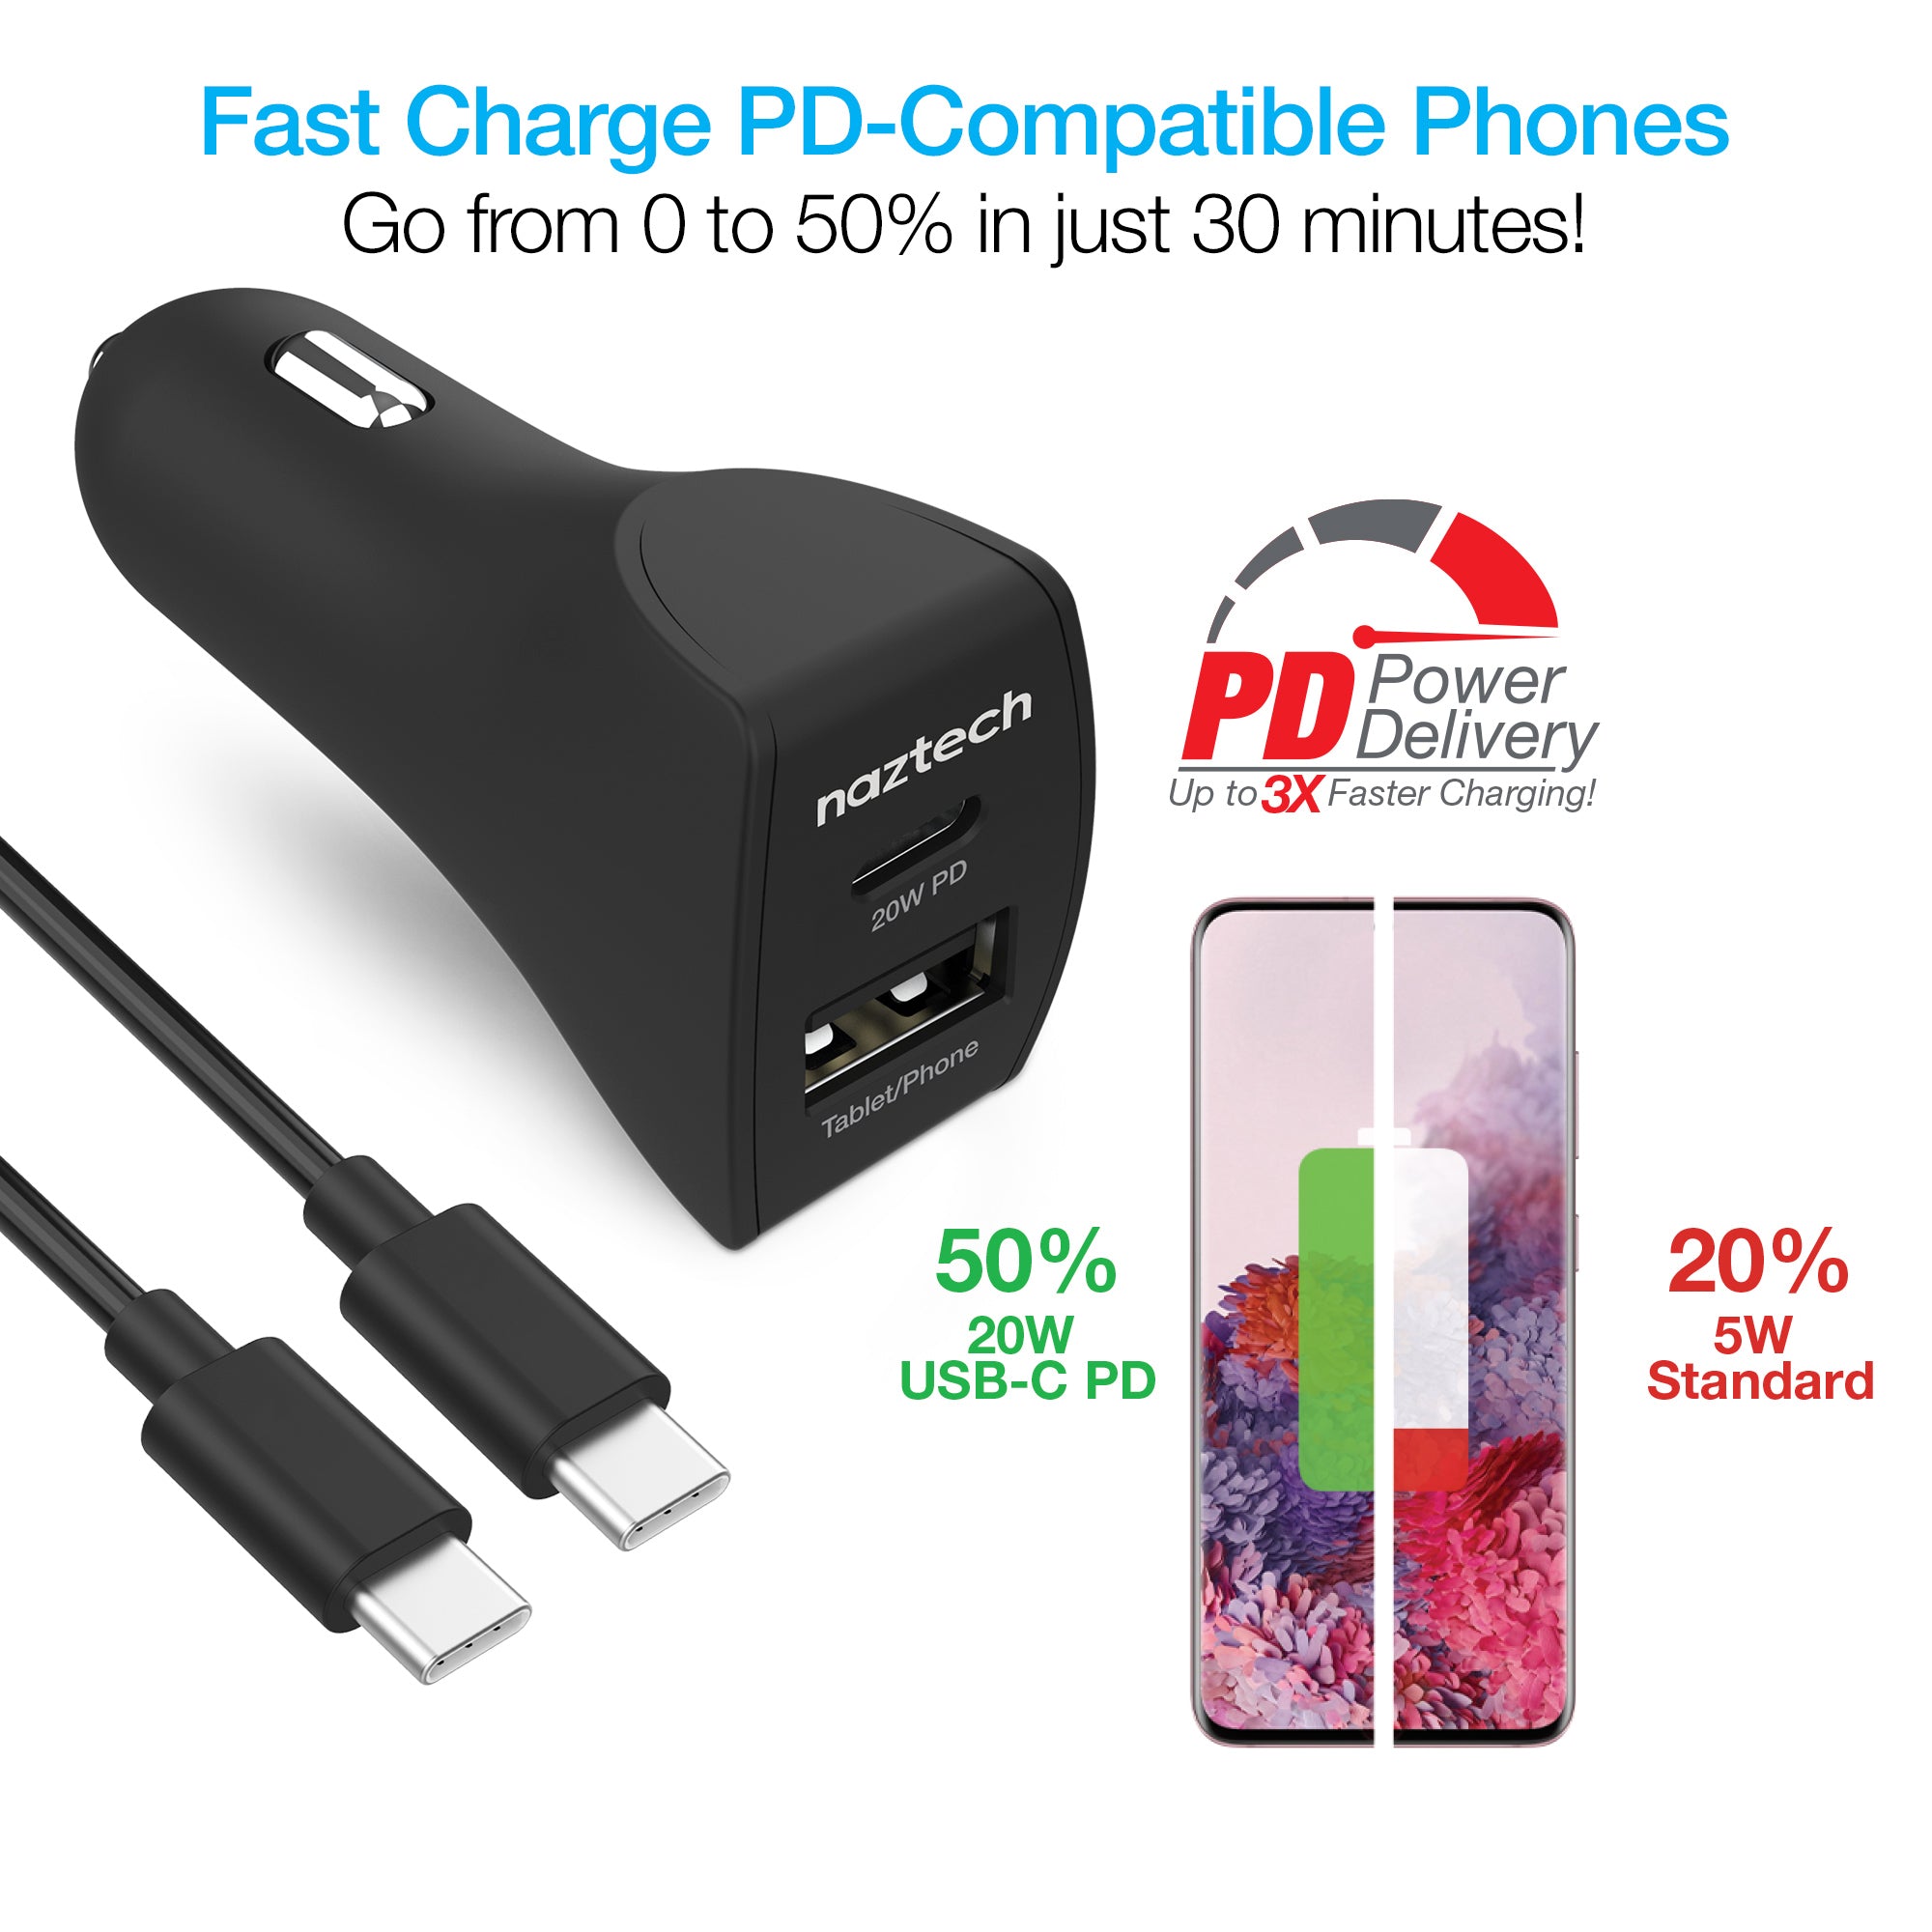 Naztech 20W USB-C PD+12W USB Car Charger (USBCABLE5-PRNT) - Jupiter Gear  Home